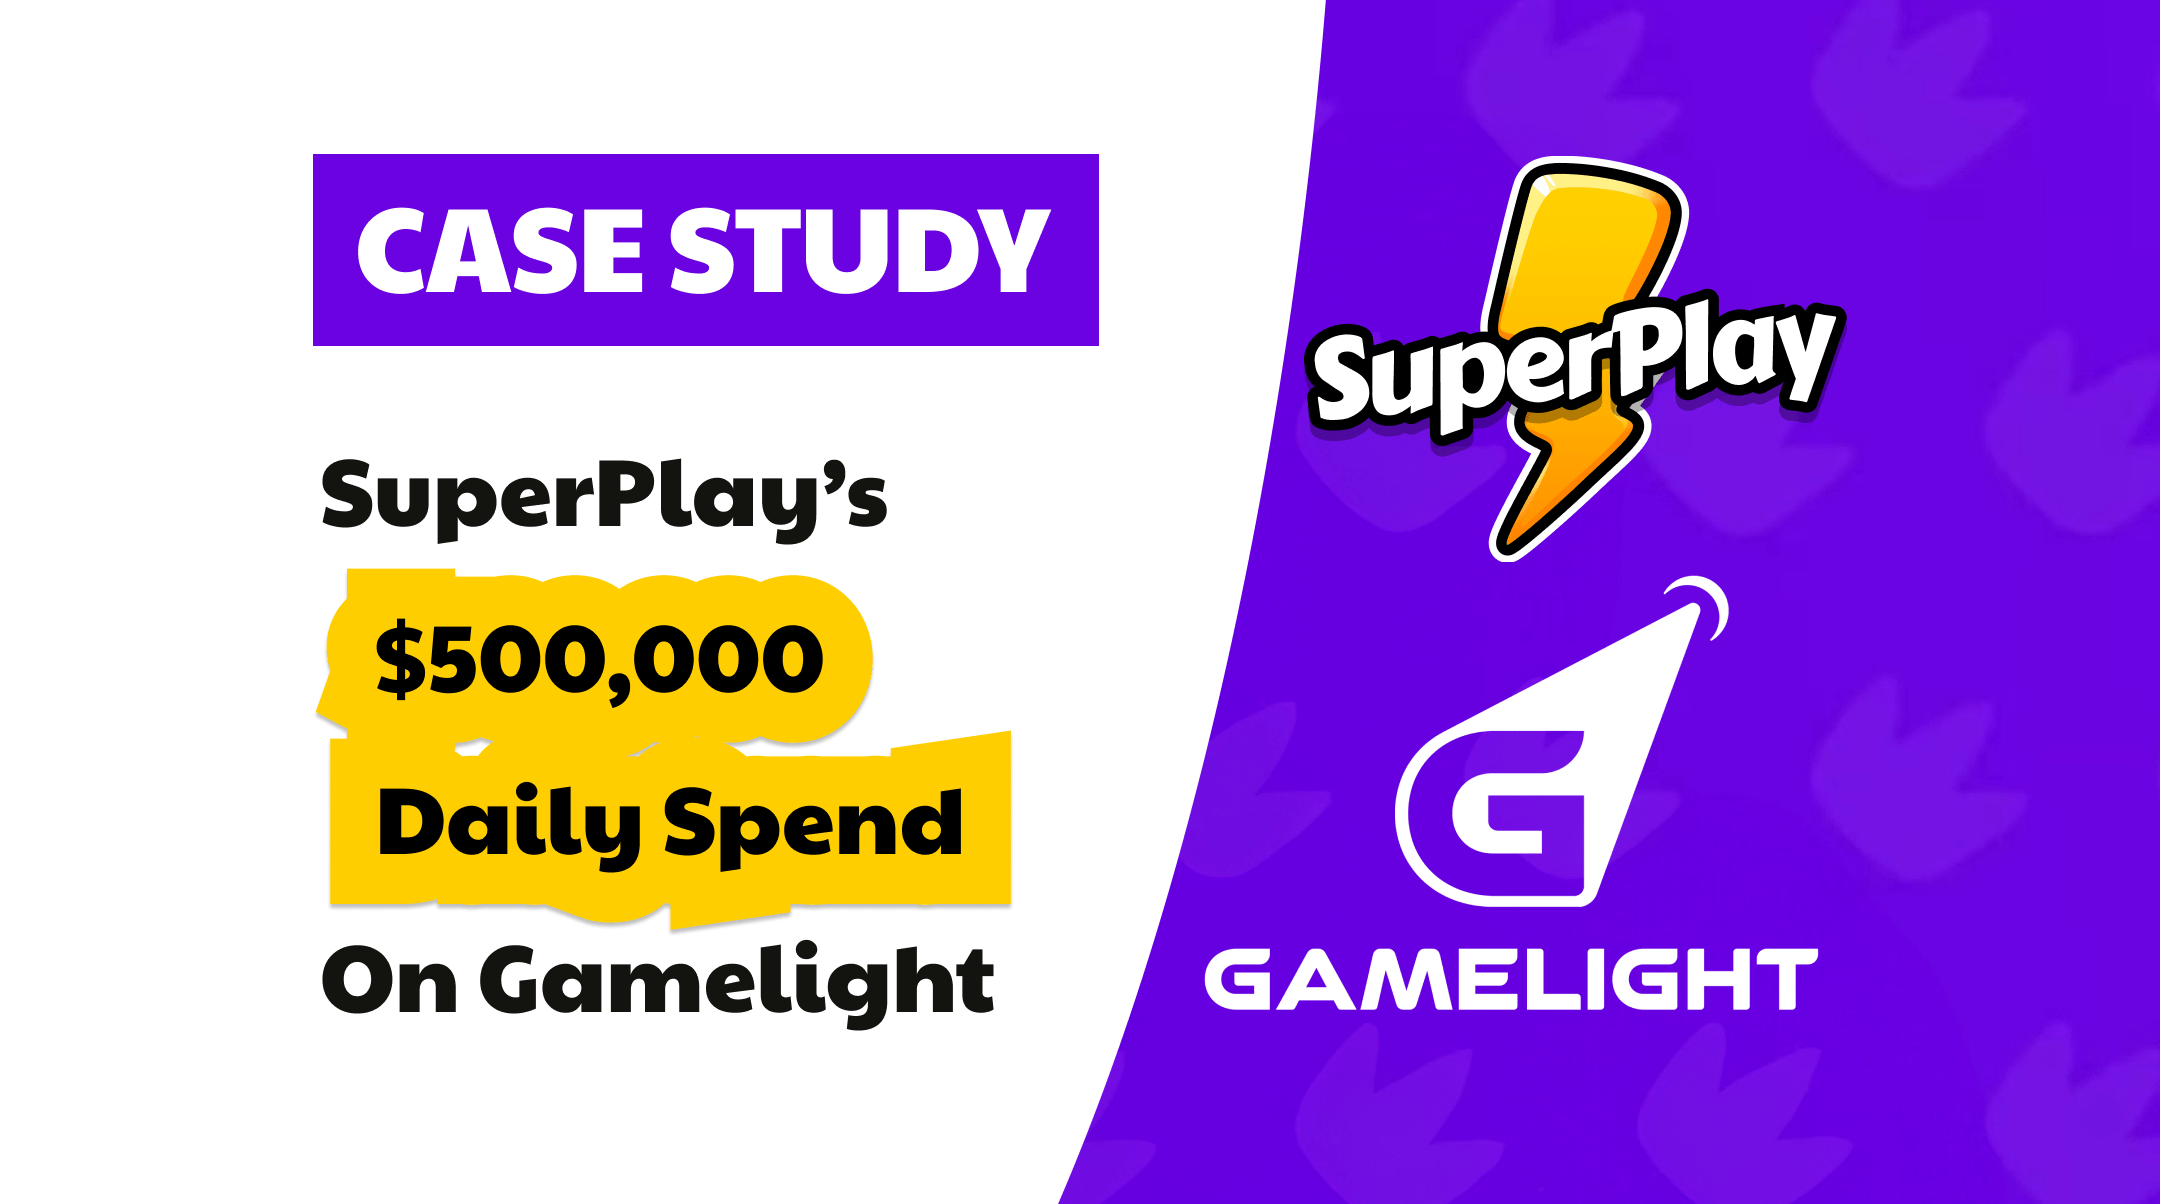 Case Study – SuperPlay’s $500,000 daily spend on Gamelight